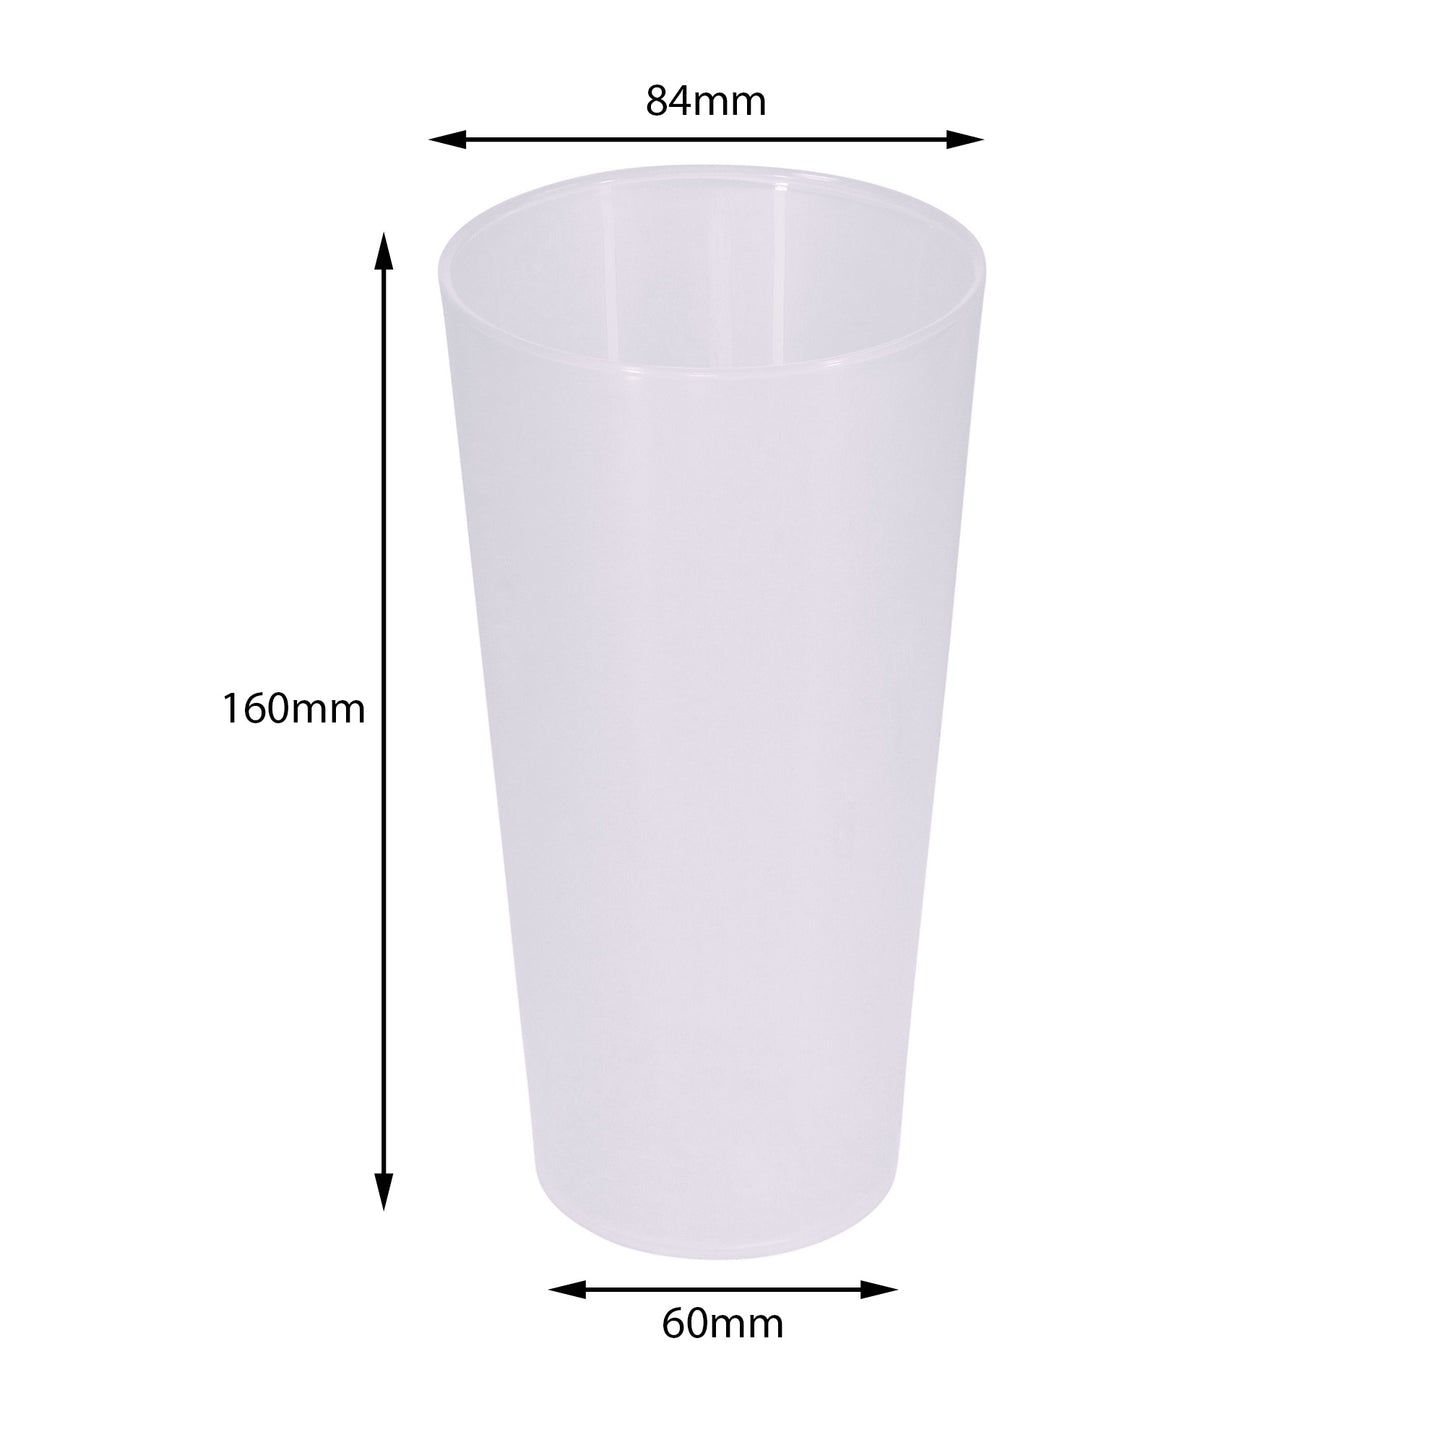 Pack of 10 Pint Cups Reusable Plastic - 1 Pint 568ml 20oz - Dishwasher safe Strong Straight edge Glasses for Beer, Soft Drinks, Water